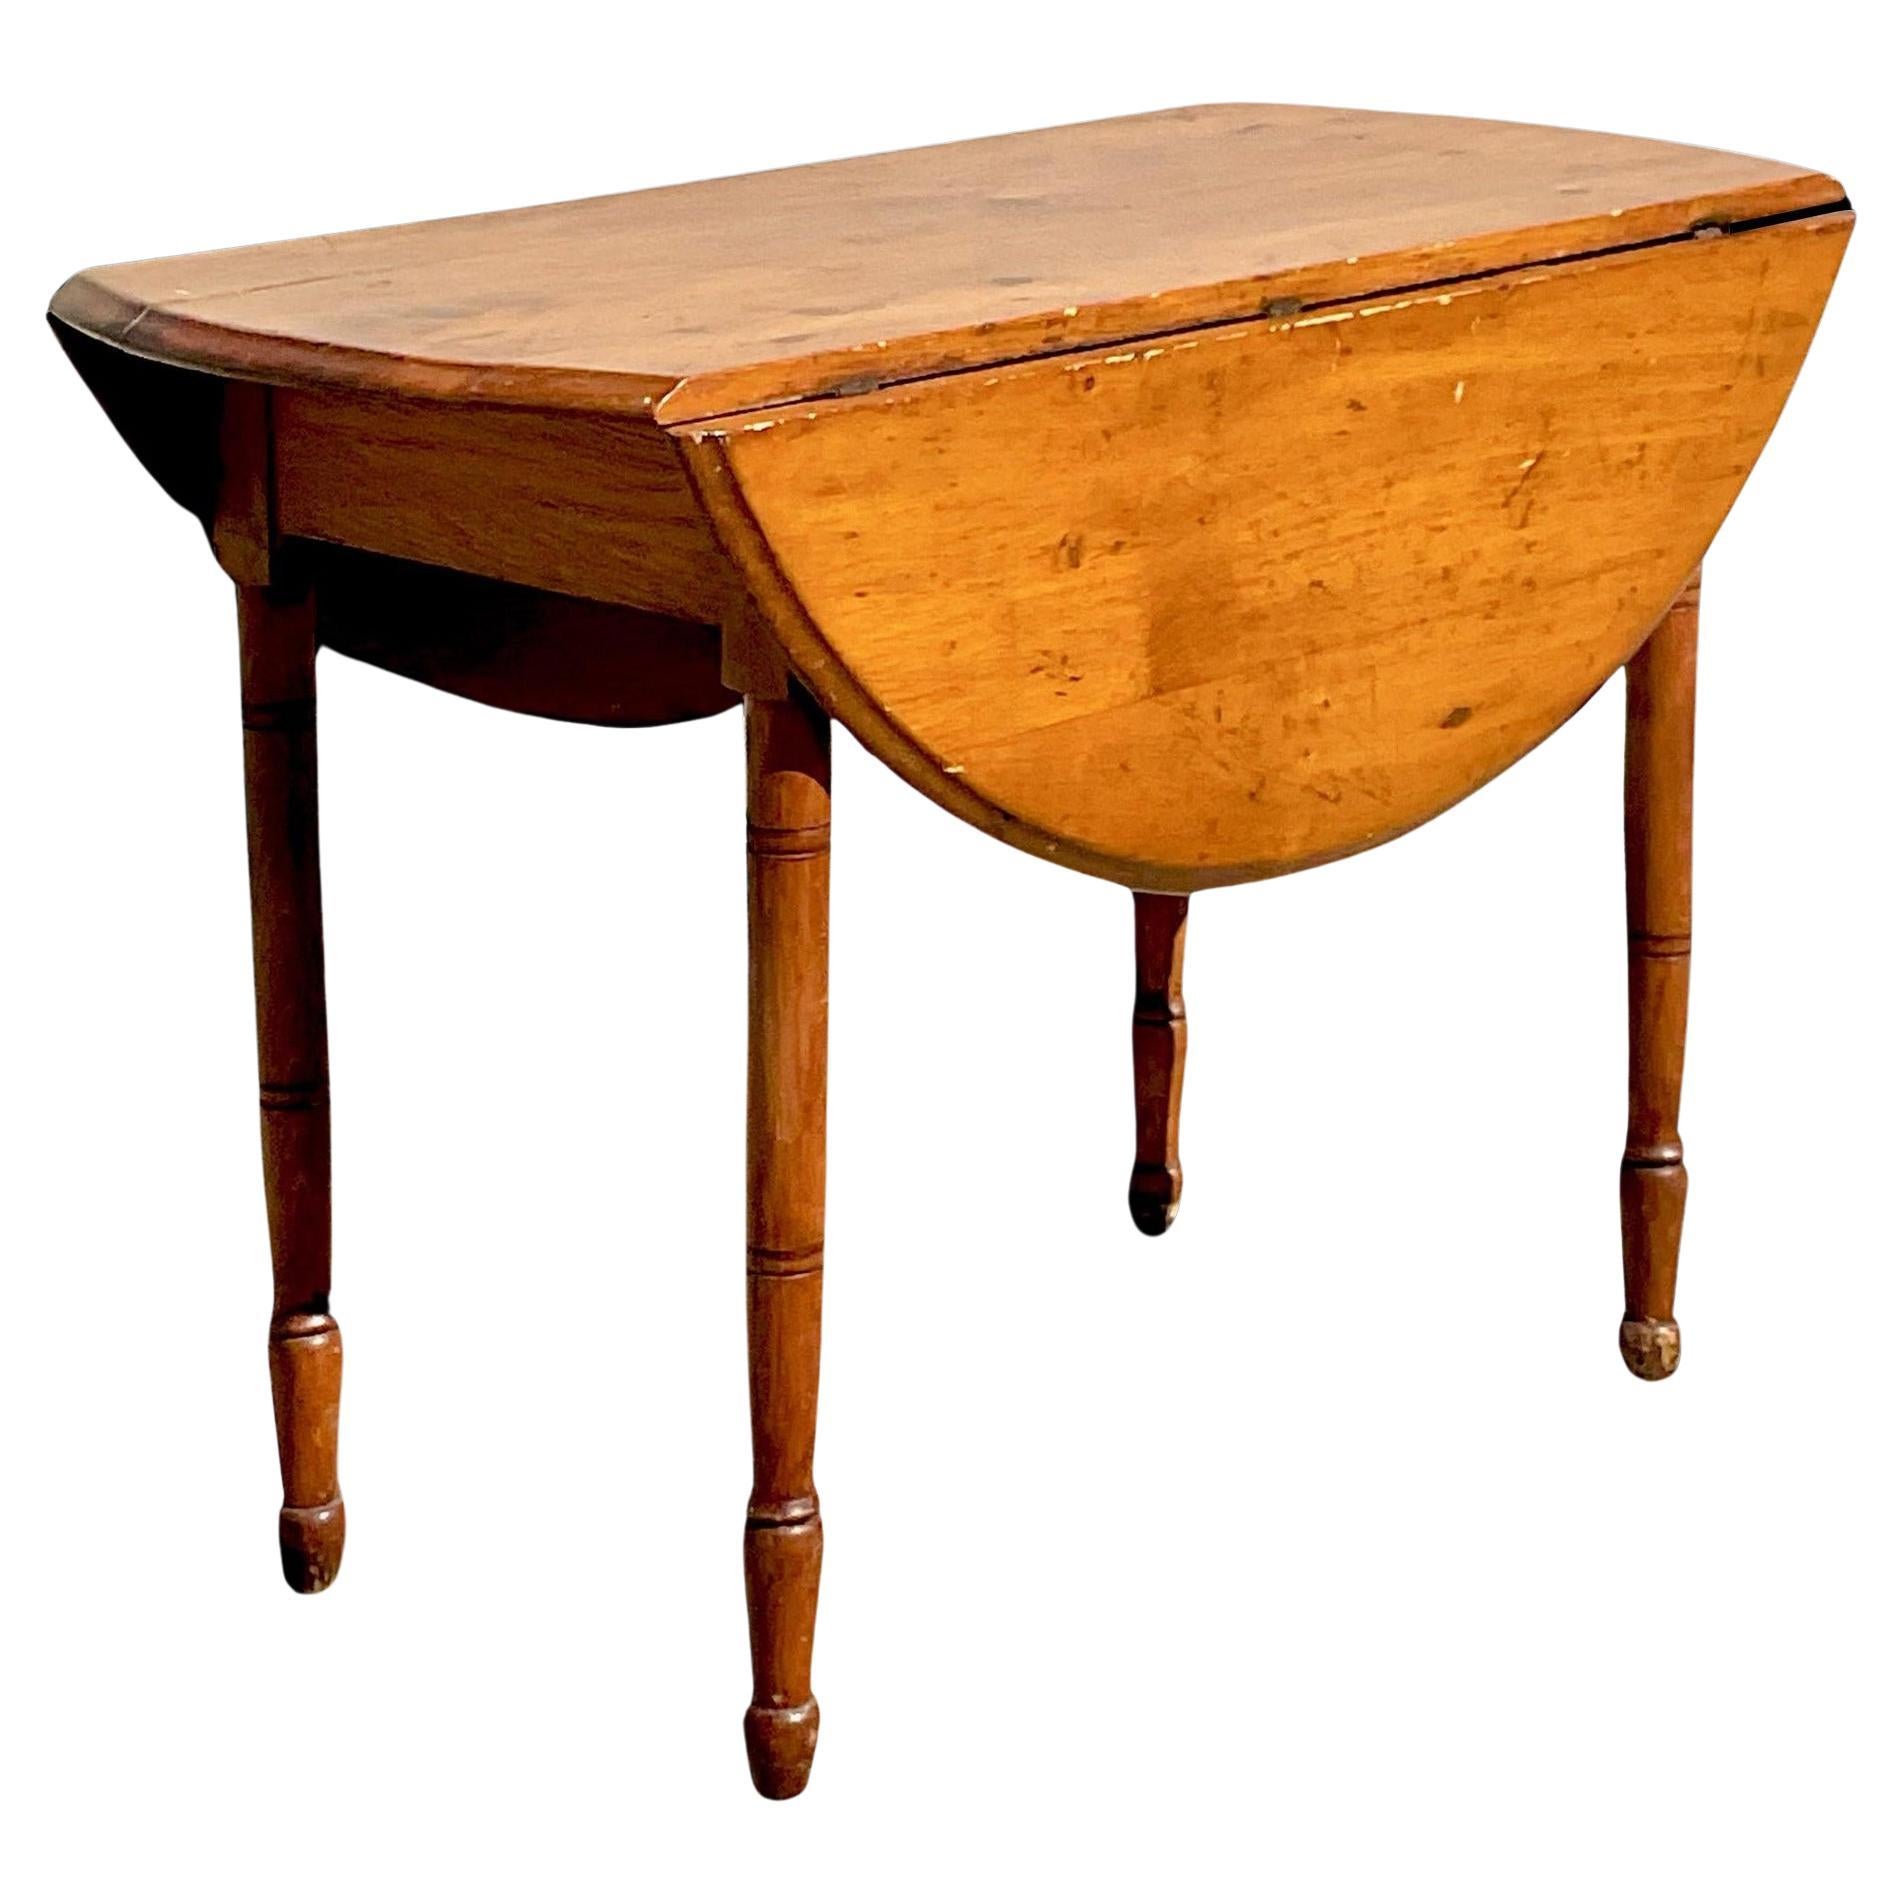 Early 20th Century Vintage Turned Leg Drop Leaf Table For Sale